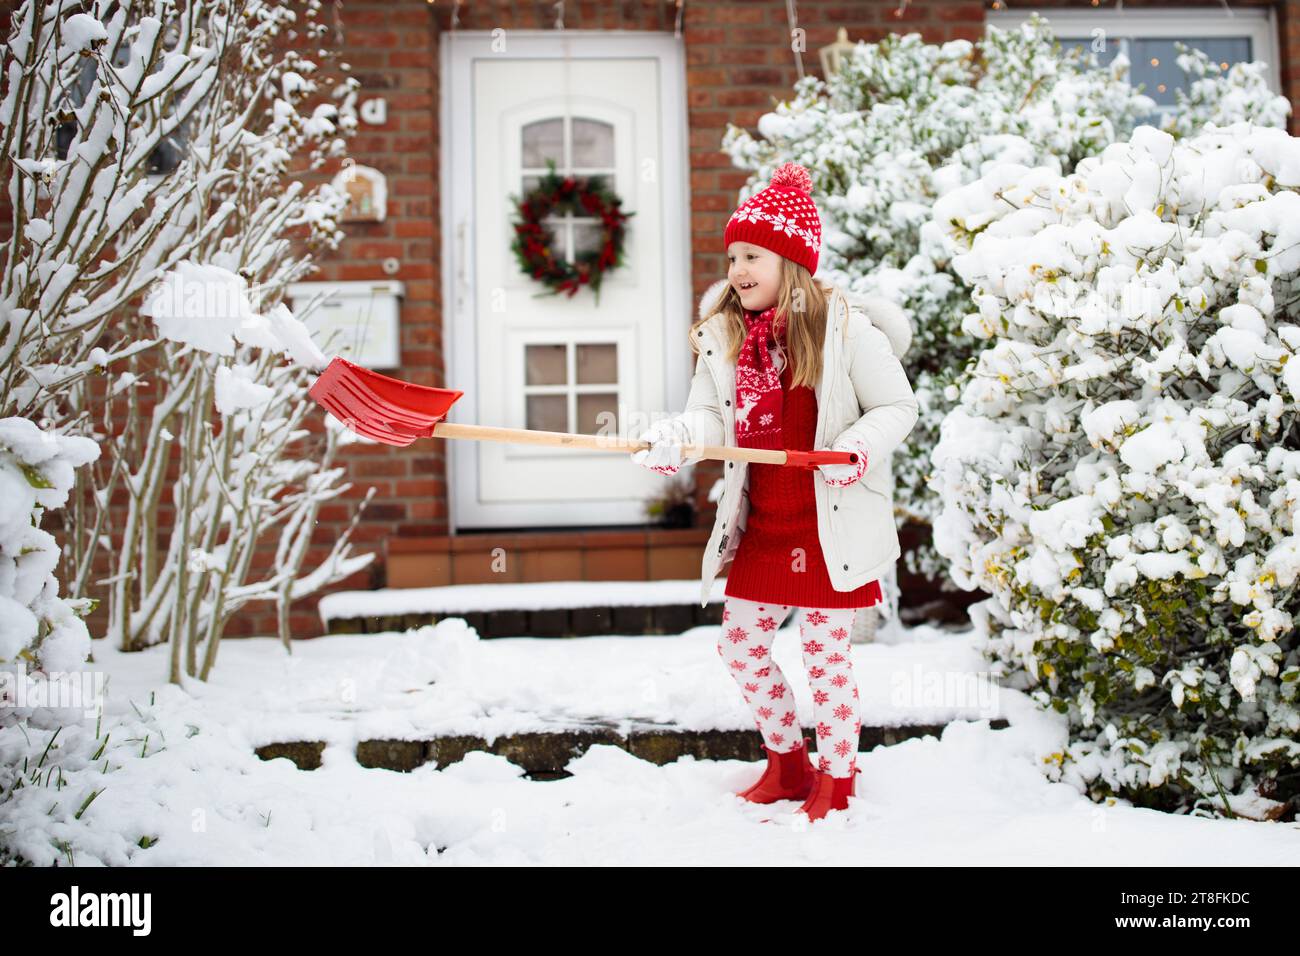 Child shoveling snow. Little girl with spade clearing driveway after winter snowstorm. Kids clear path to house door after Christmas blizzard. Stock Photo